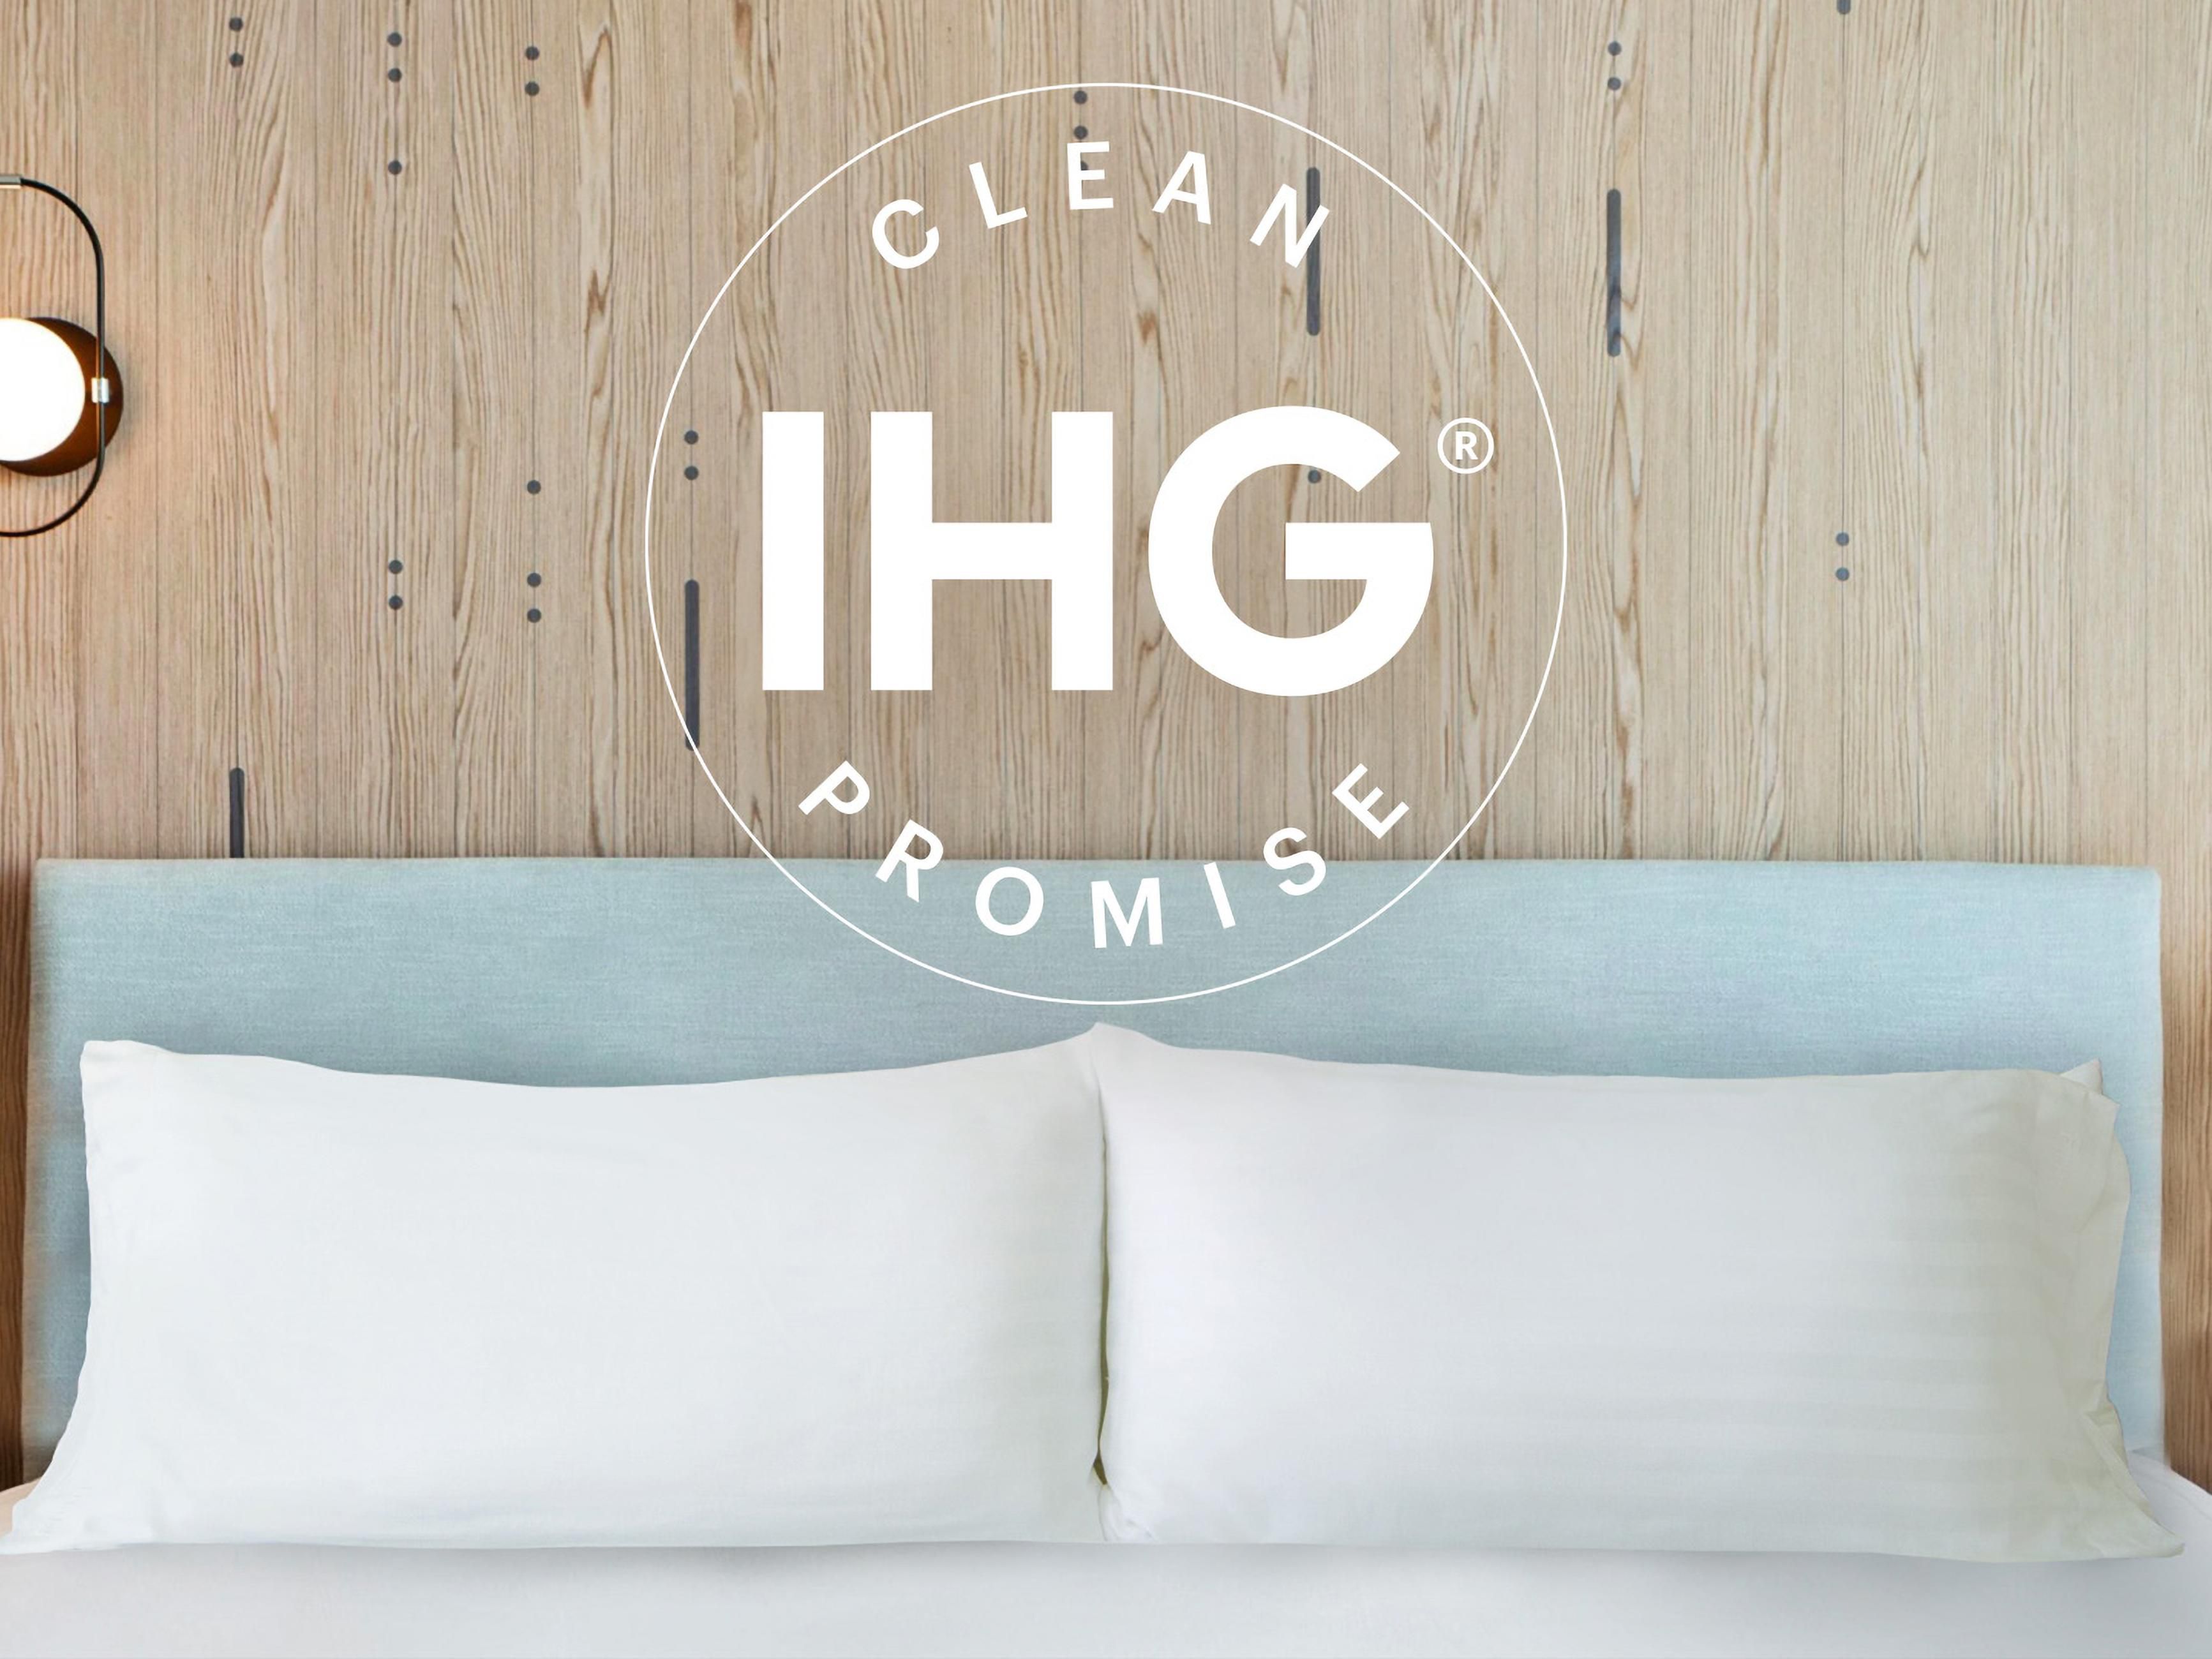 The Holiday Inn & Suites Boston-Peabody is proudly participating in the IHG Clean Promise program. The hotel has implemented new science-led protocols and partnered with industry leading experts. These strengthened procedures are designed to give you greater confidence and our team the protection needed.